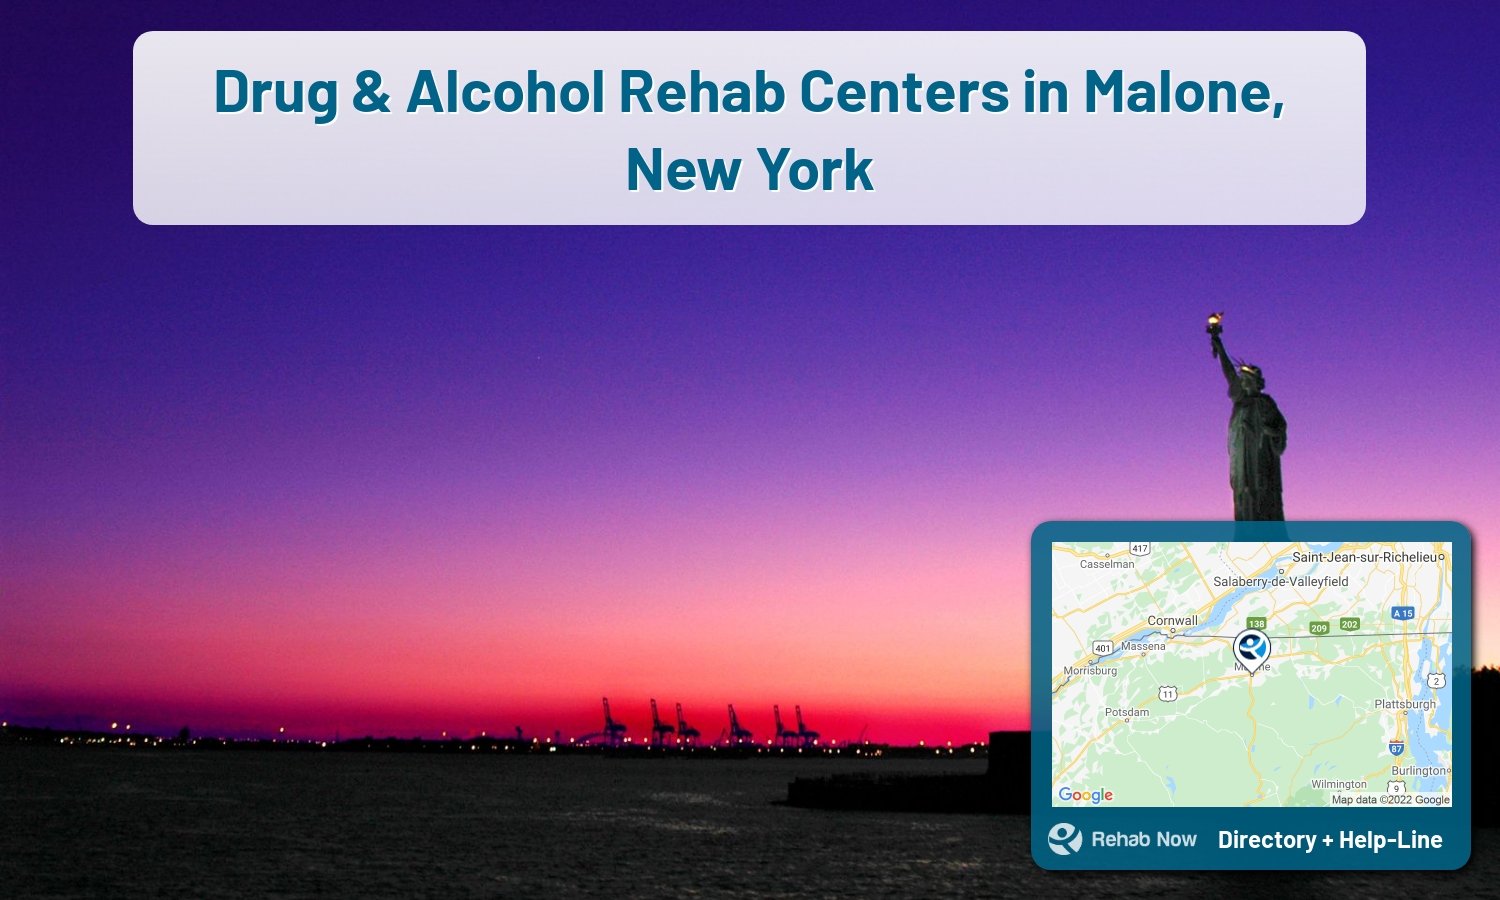 Find drug rehab and alcohol treatment services in Malone. Our experts help you find a center in Malone, New York